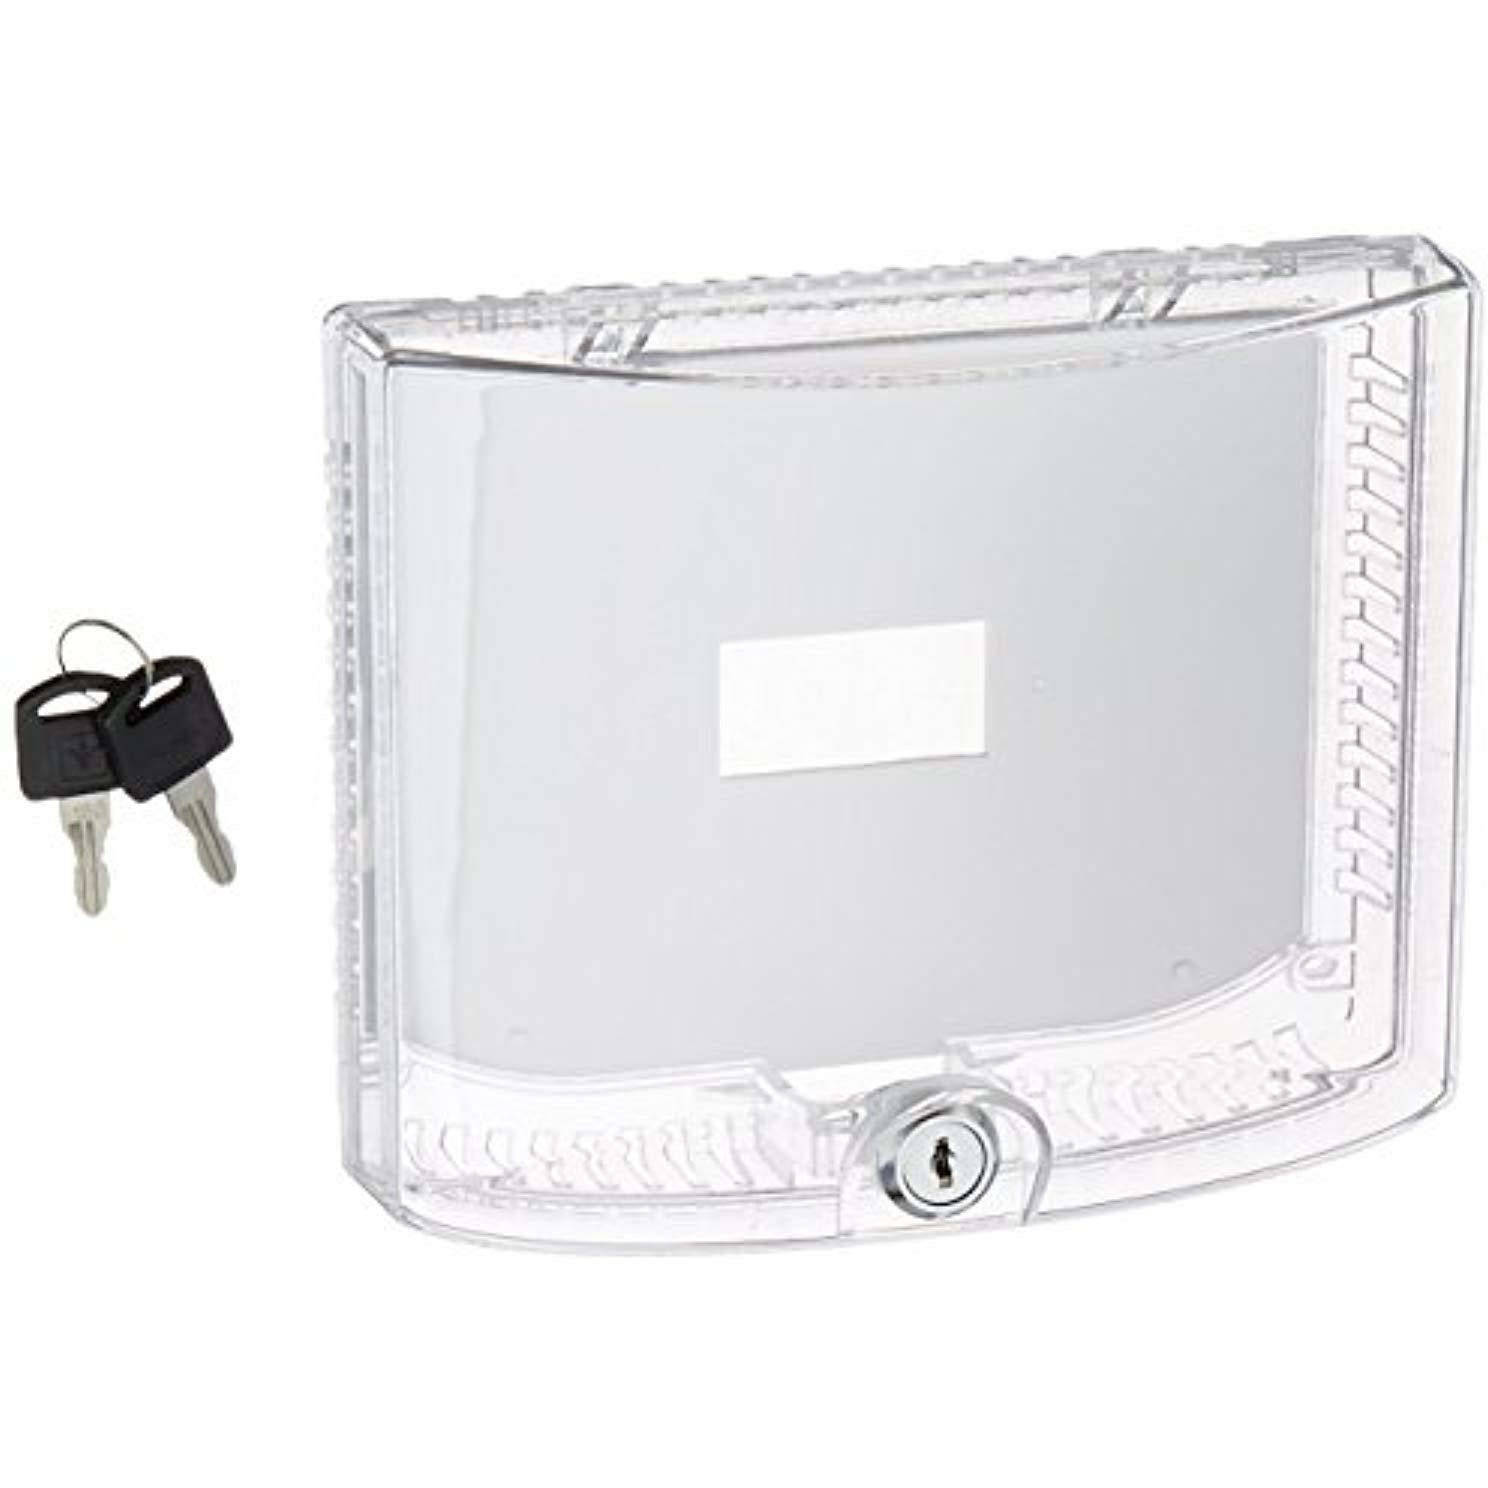 Braeburn 5970 Universal Thermostat Guard with Keyed Lock– Wholesale Home